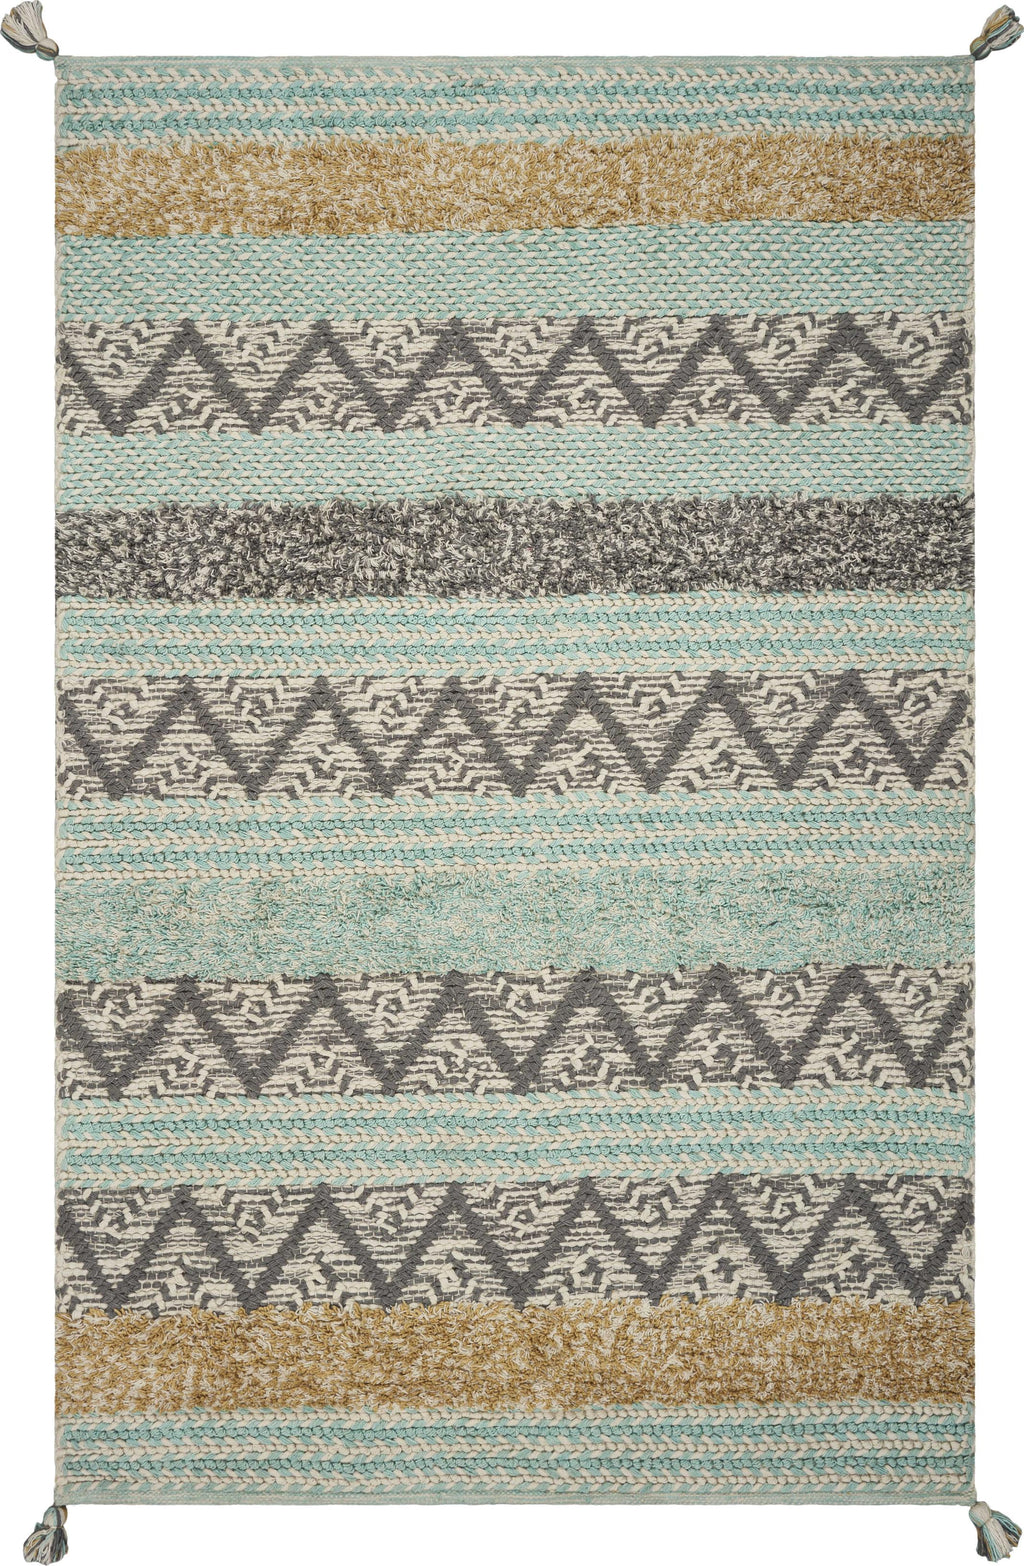 5' x 7' Polyester Turquoise Area Rug